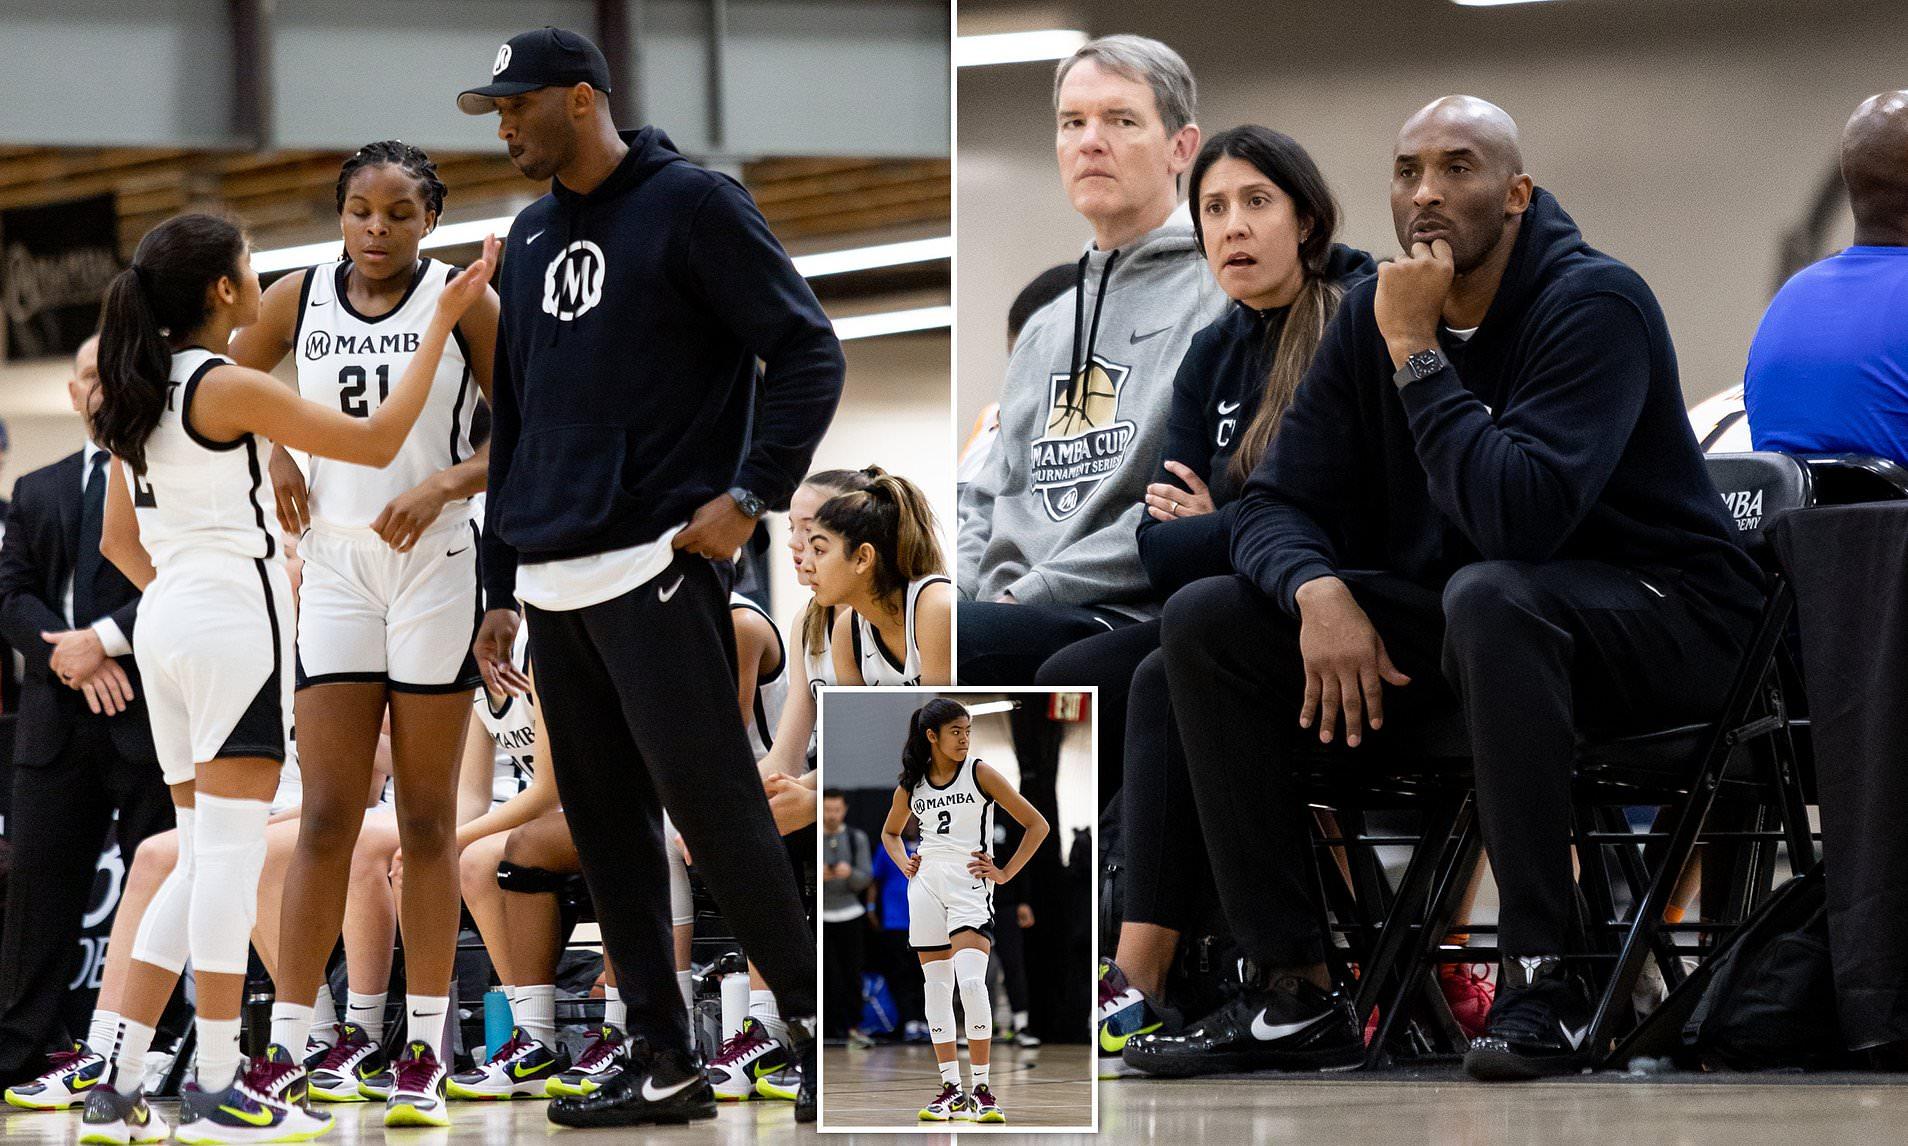 Haunting final image of Kobe Bryant as he coaches his daughter a